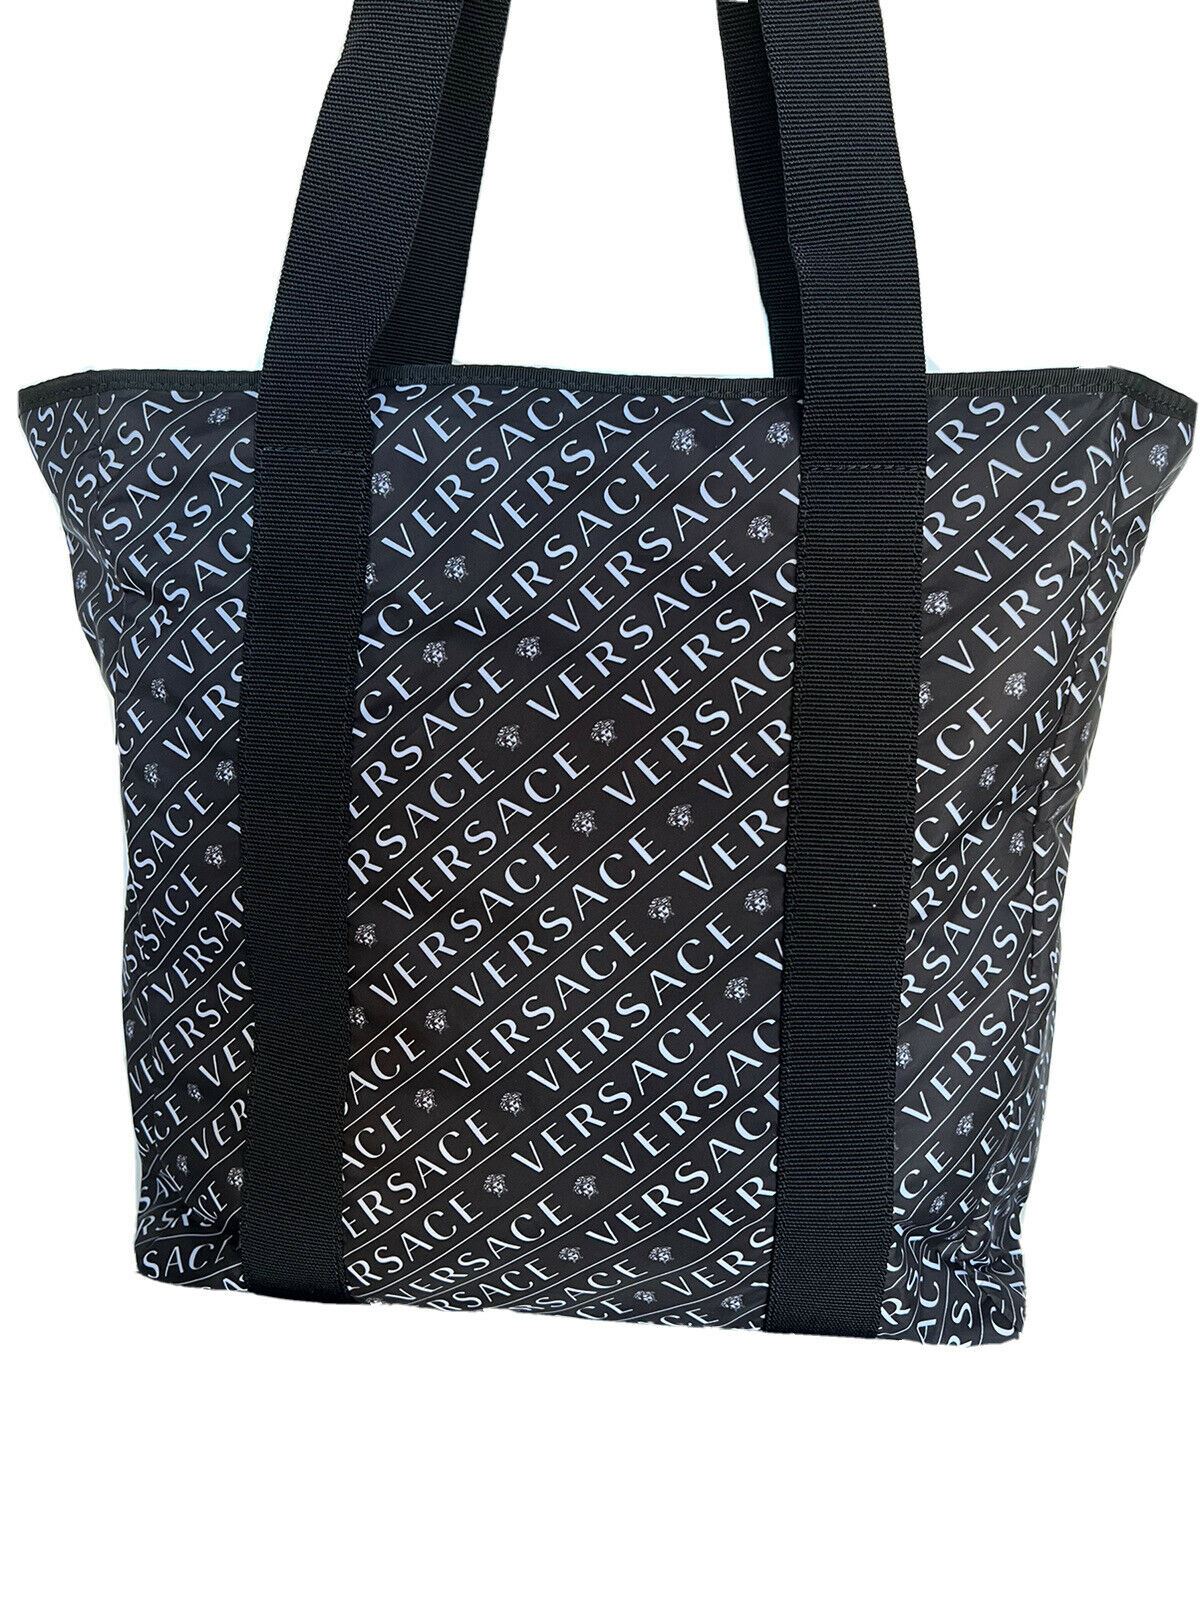 New Versace Black & White Logo Nylon Light Weight Tote Bag Made in Italy DFB8121